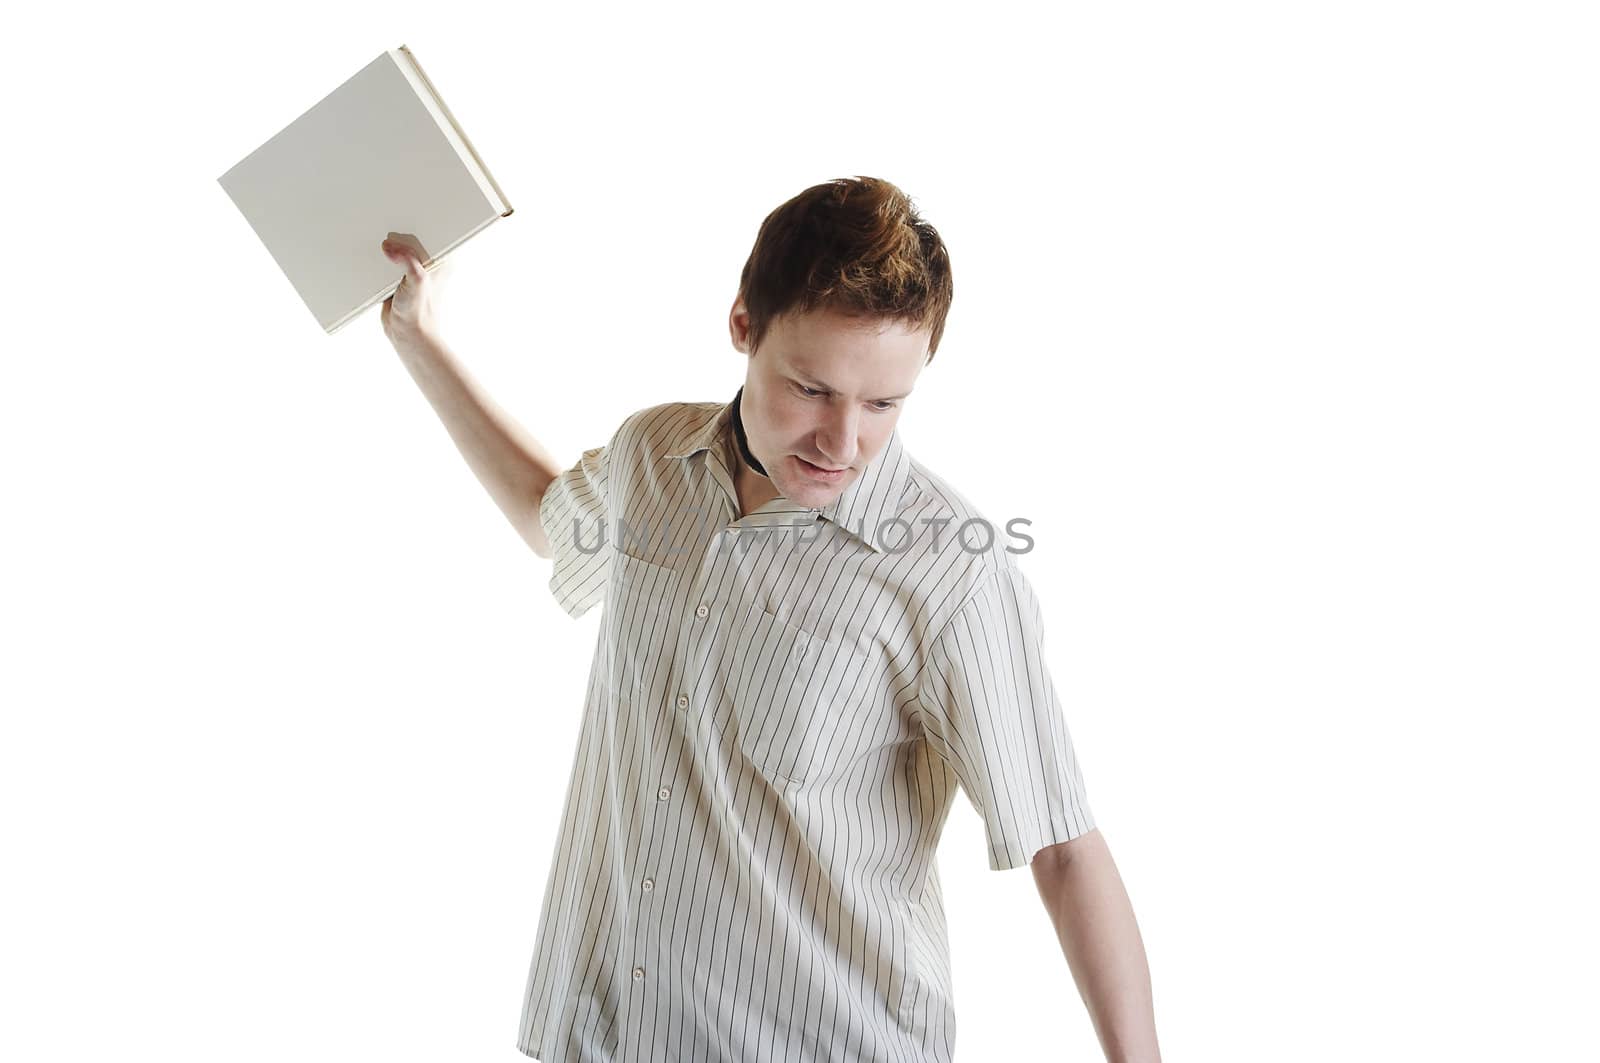 Angry student throwing book on the floor